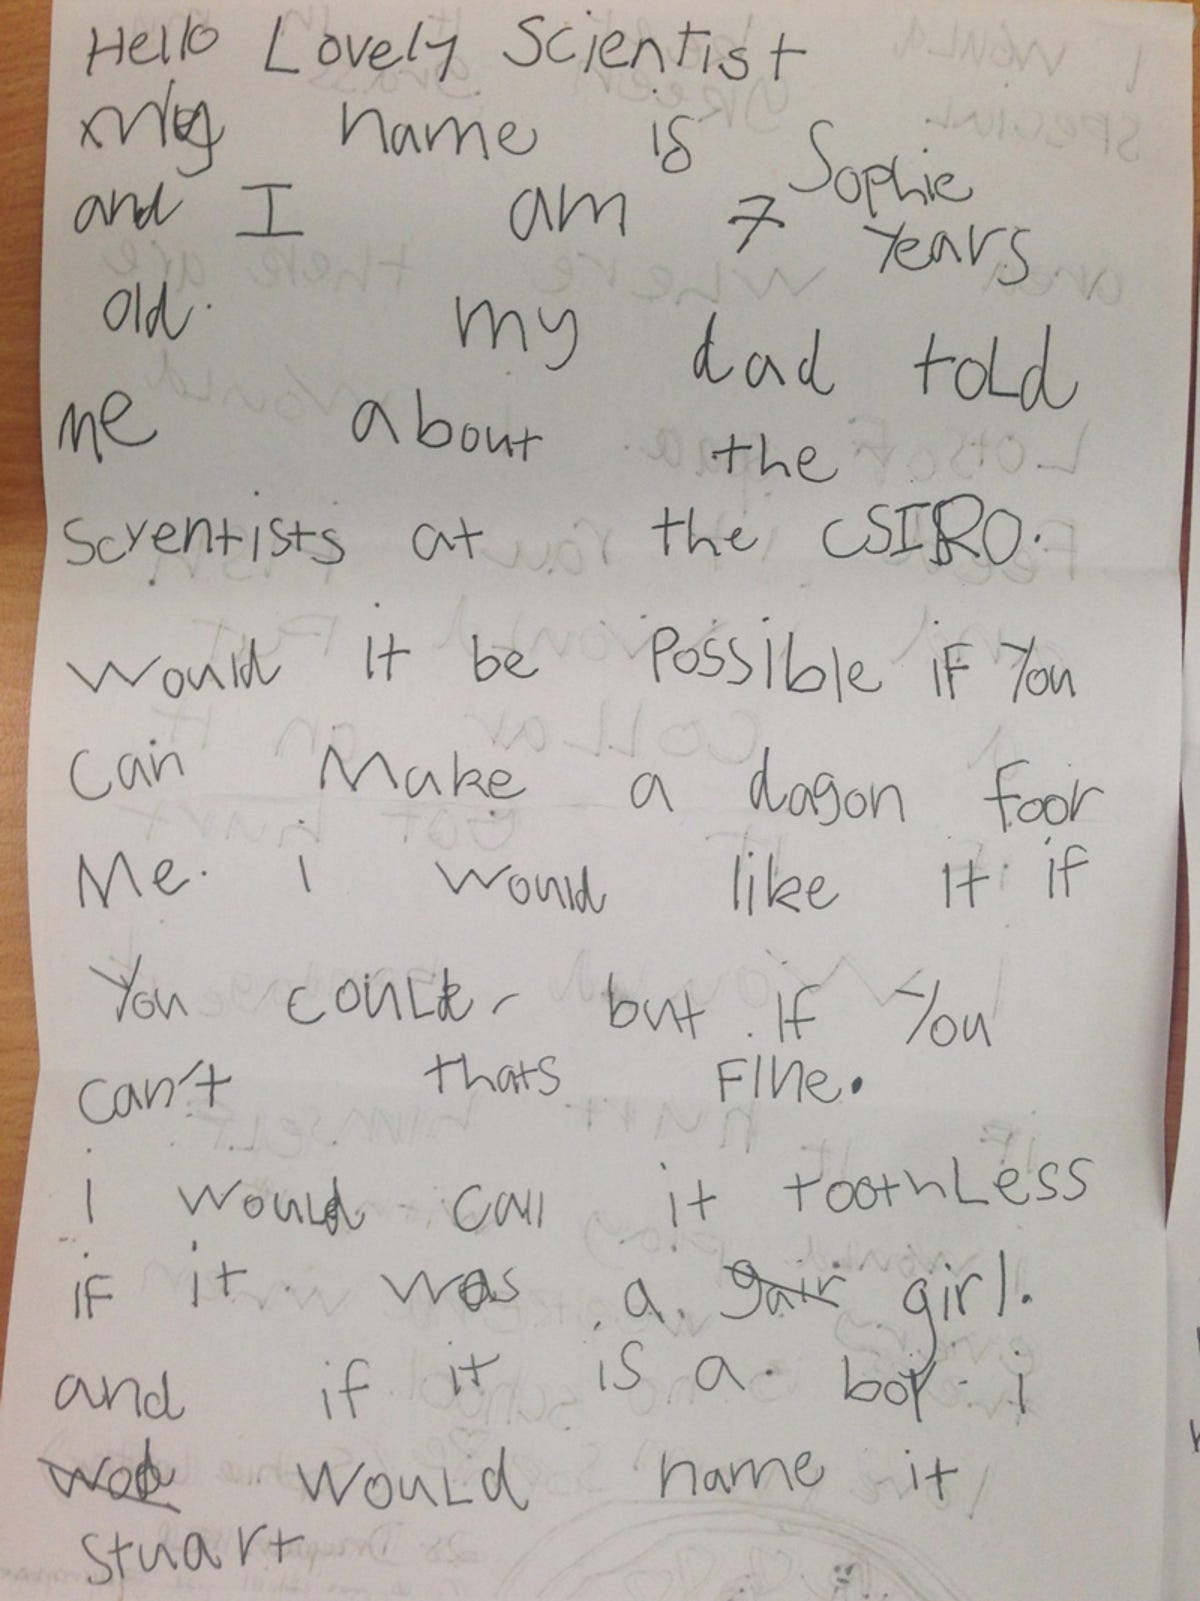 Little did Sophie Lester know that her letter to CSIRO asking for a dragon would charm the scientists into creating her own winged-pet named Toothless.